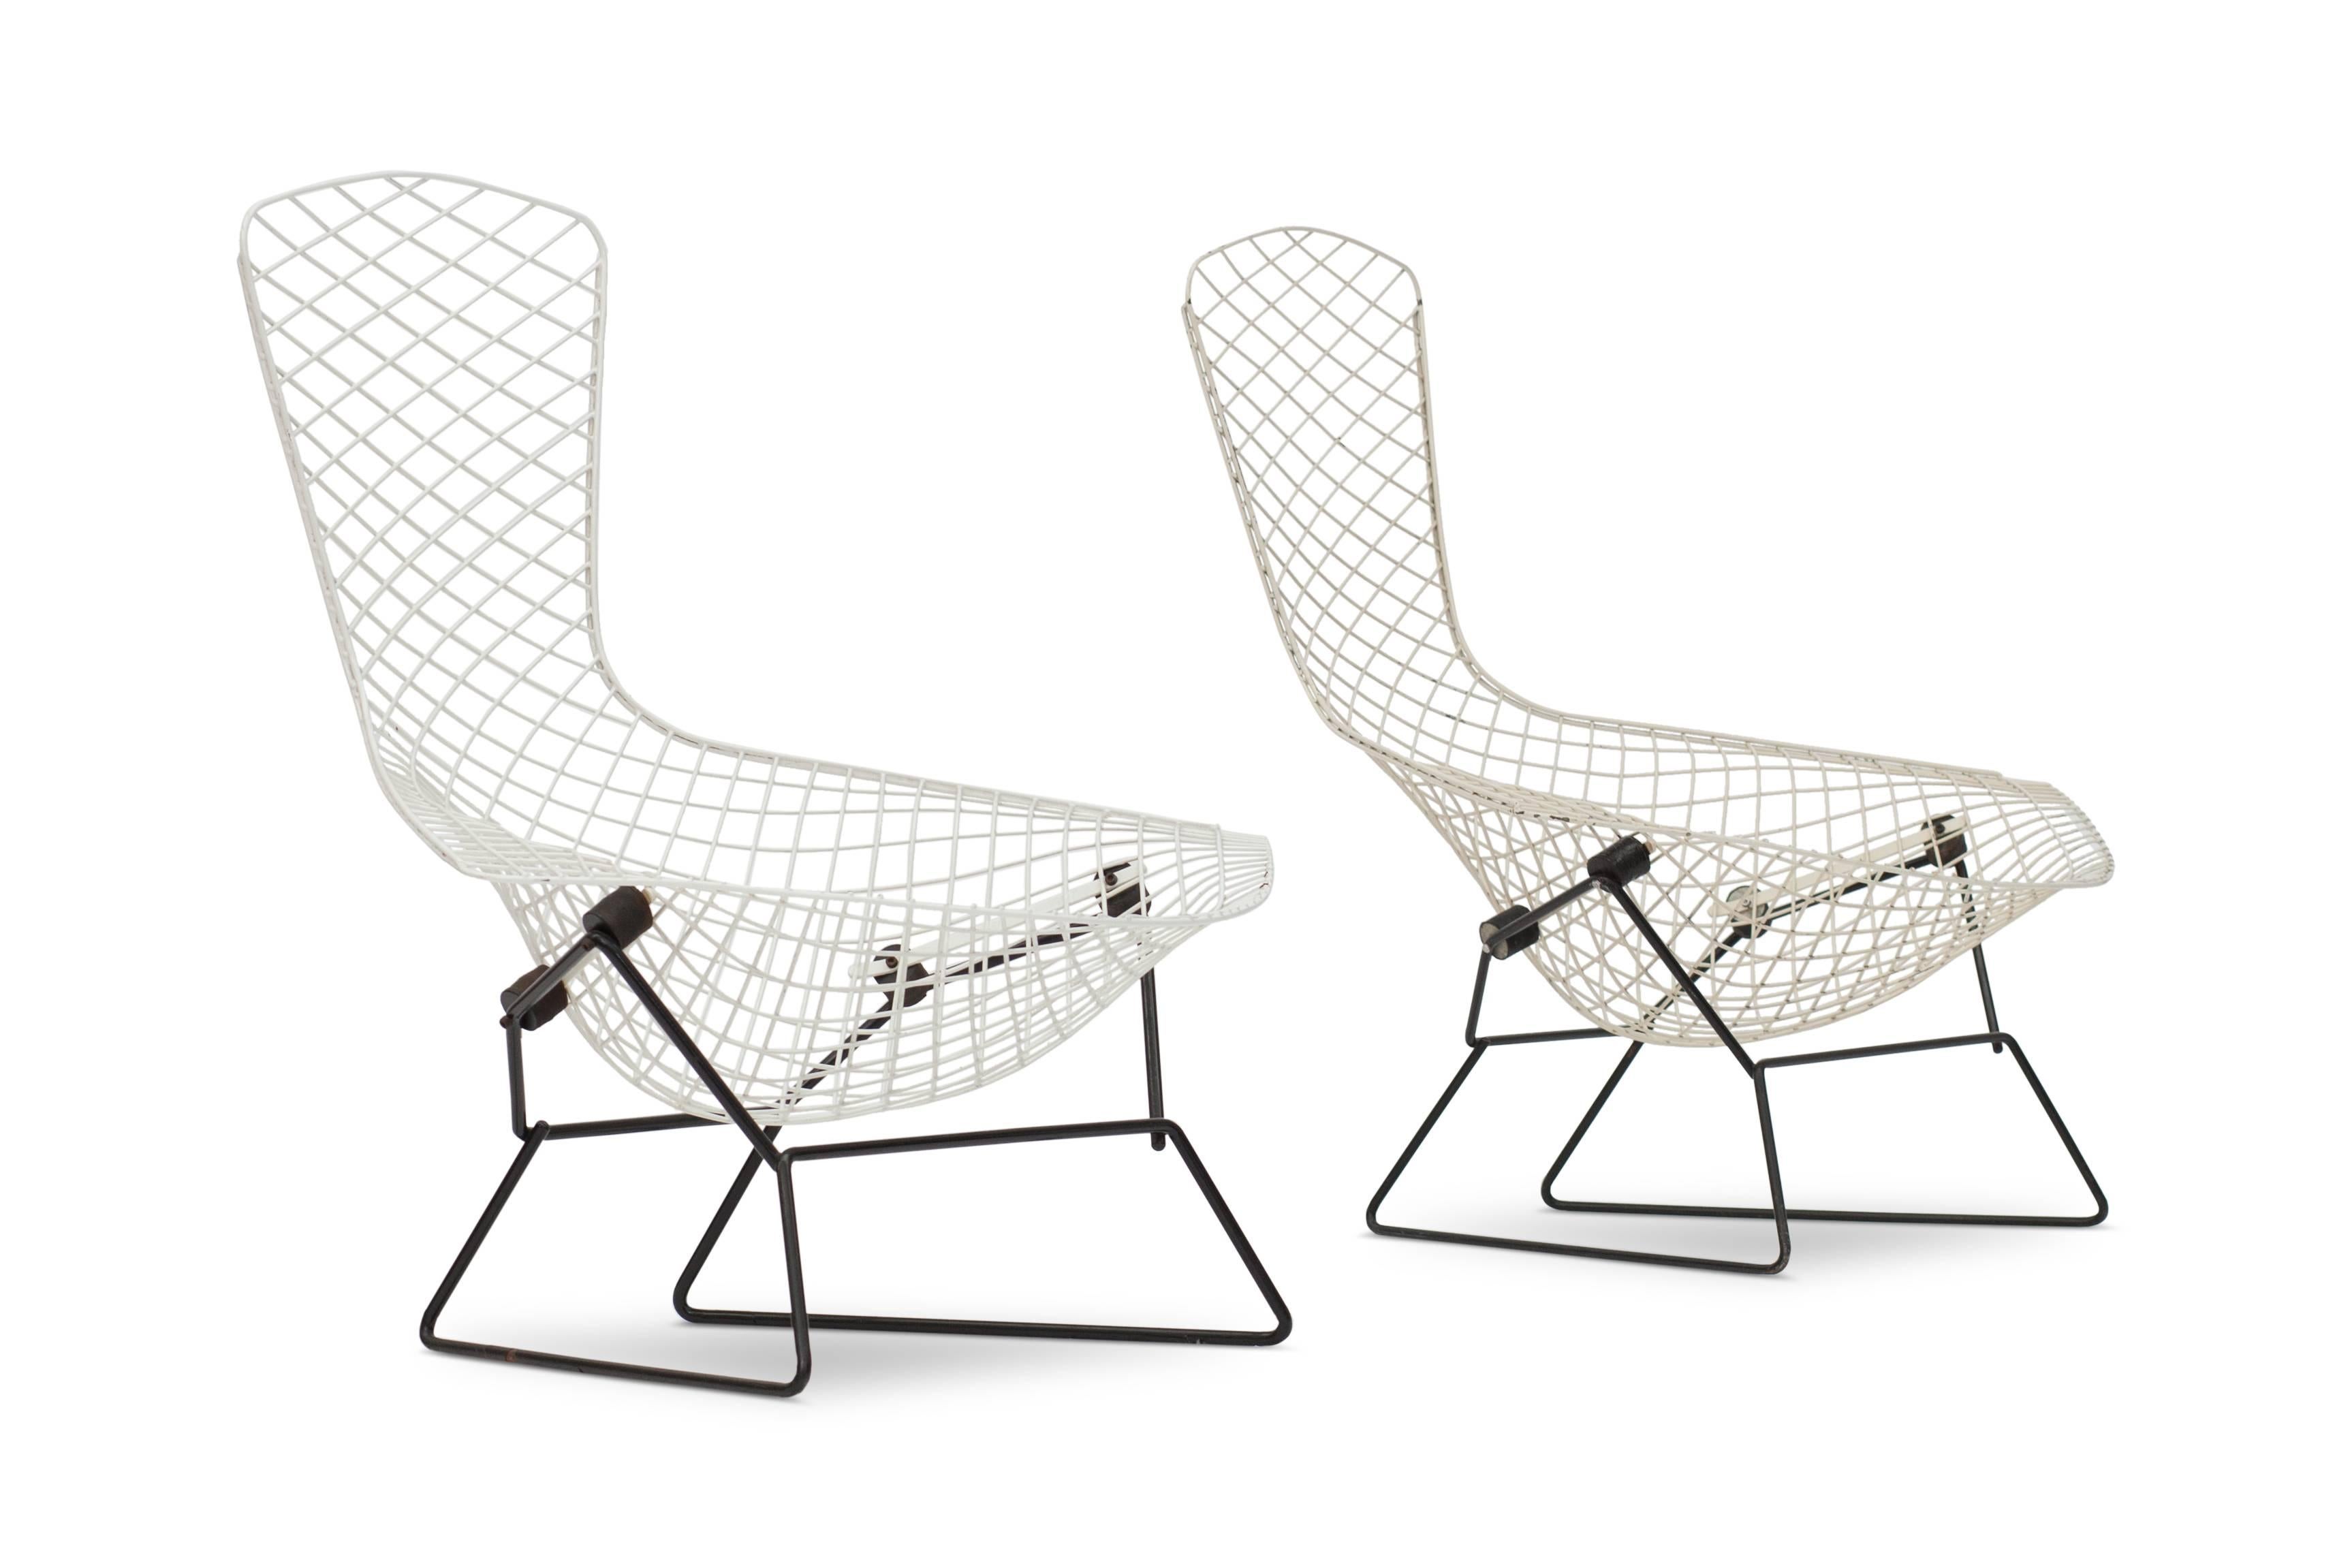 Pair of Harry Bertoia bird chairs for Knoll International.

White wired seating frame on black base.

USA, 1960s edition.

The Bird chair is an astounding study in space, form and function by one of the master sculptors of the last century.